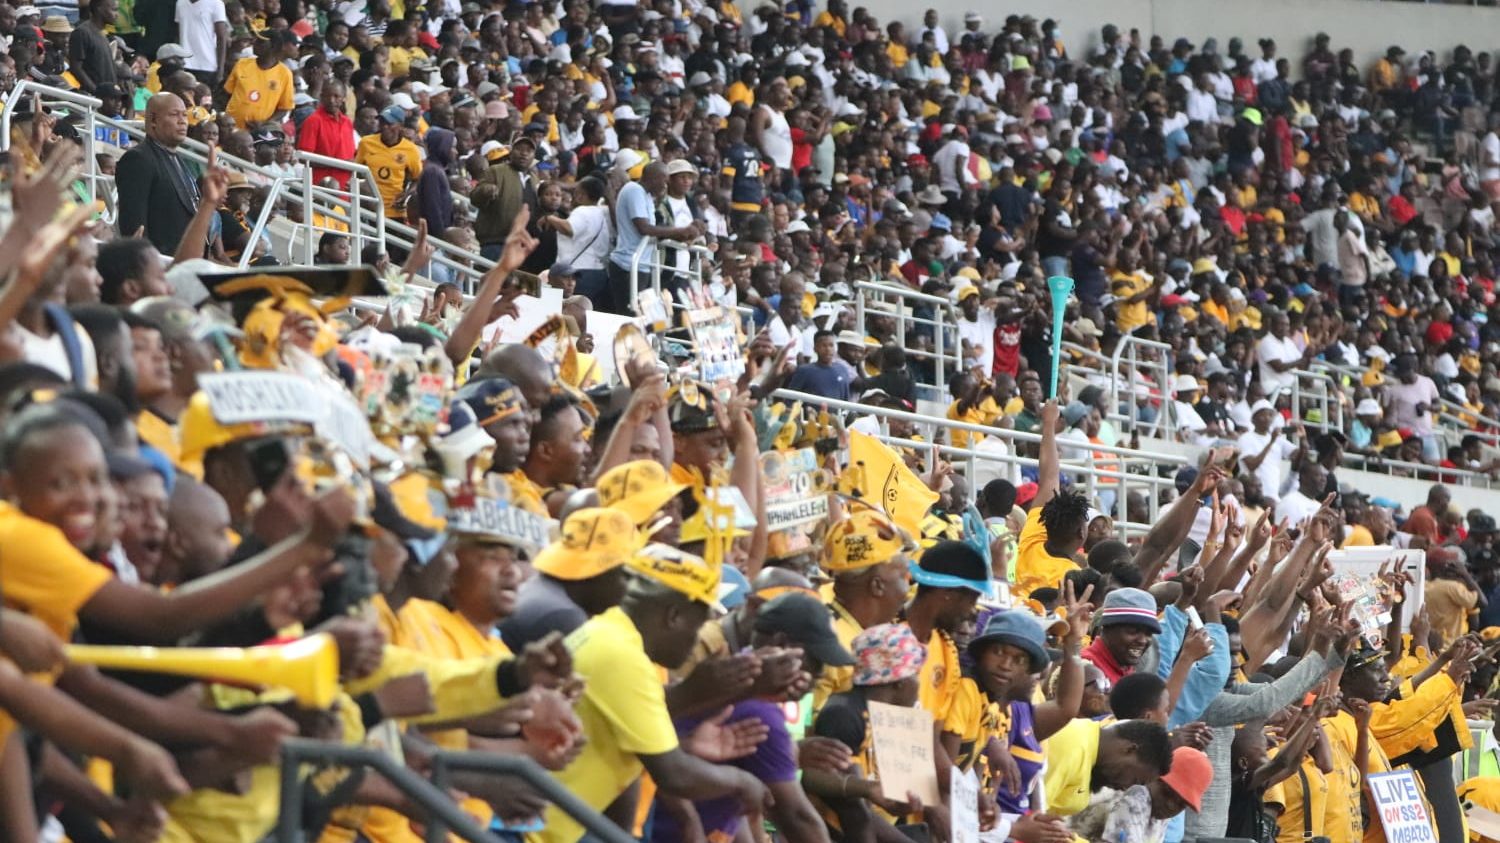 Kaizer Chiefs fans came out in numbers at Peter Mokaba Stadium